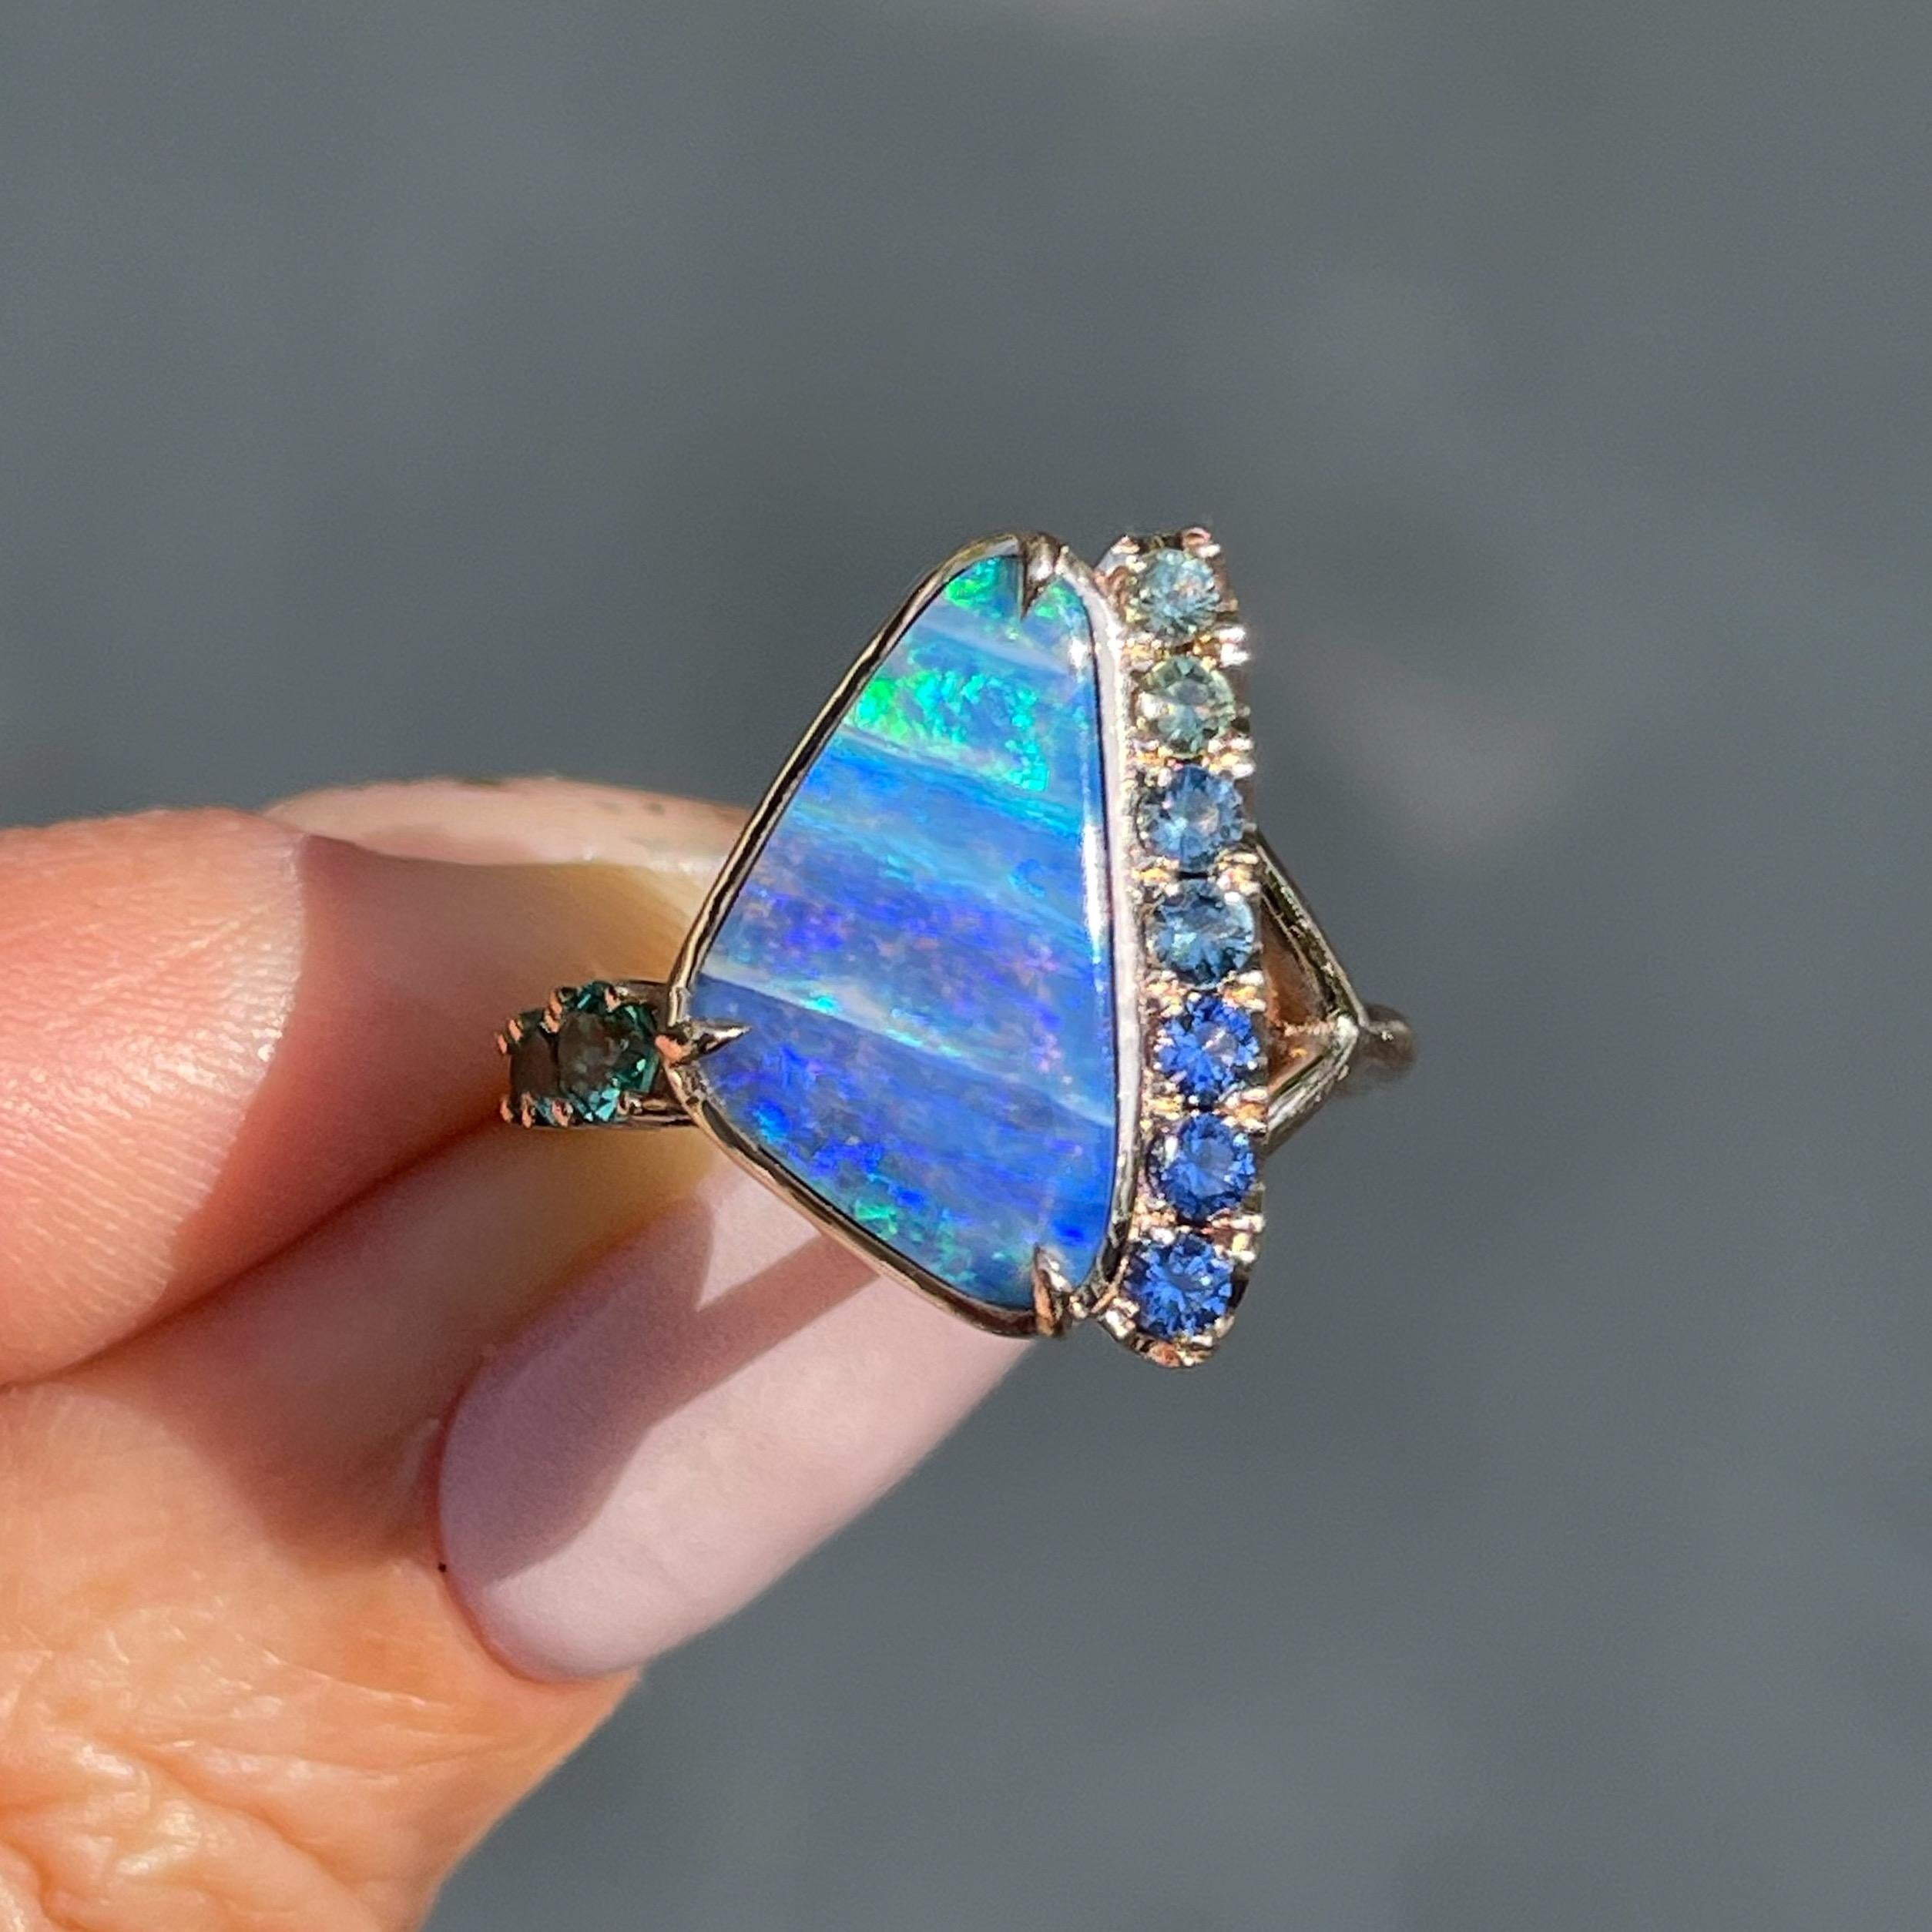 Ocean blues and seafoam greens traverse lanes in this Australian Opal Ring. Pooled hues in the opal stone are flanked by plunging ombré sapphires and a surge of emeralds in vivid green. The Boulder Opal Ring imposes a sense of order upon nature. Yet